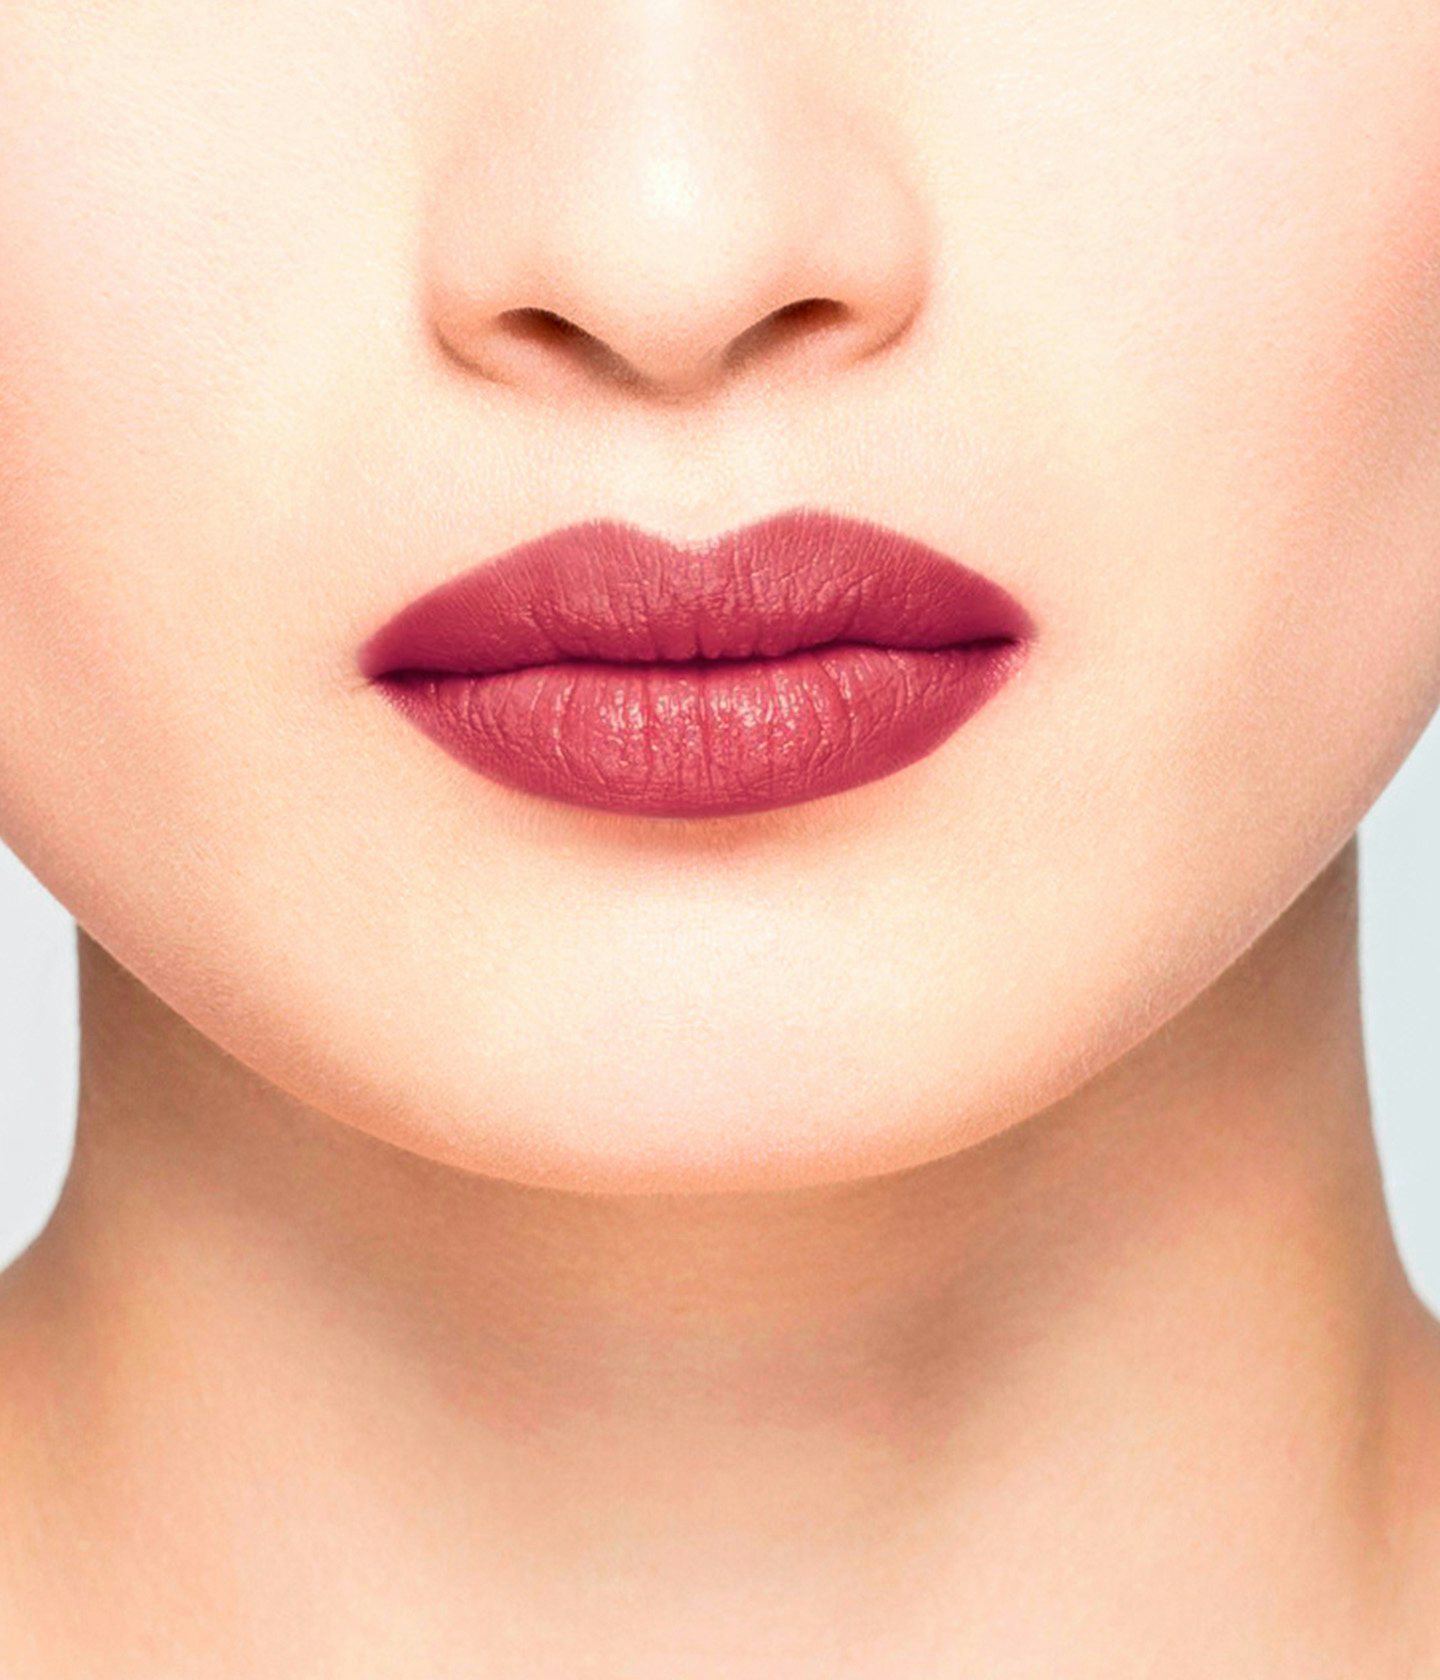 La bouche rouge Le Baume Kelly lipstick shade on the lips of an Asian model